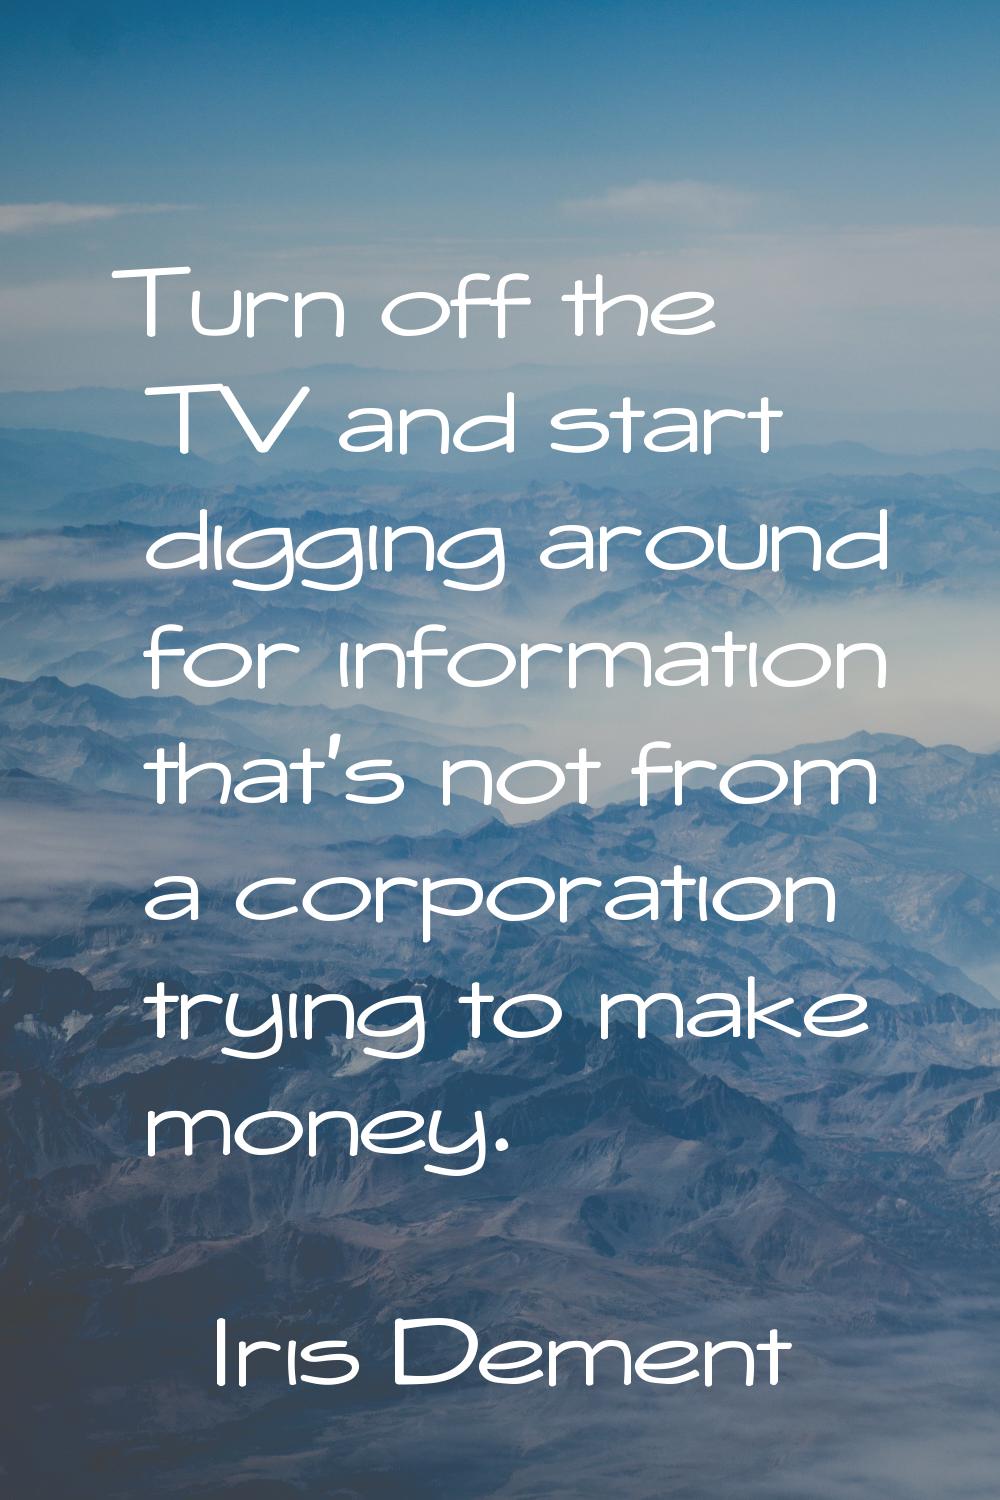 Turn off the TV and start digging around for information that's not from a corporation trying to ma